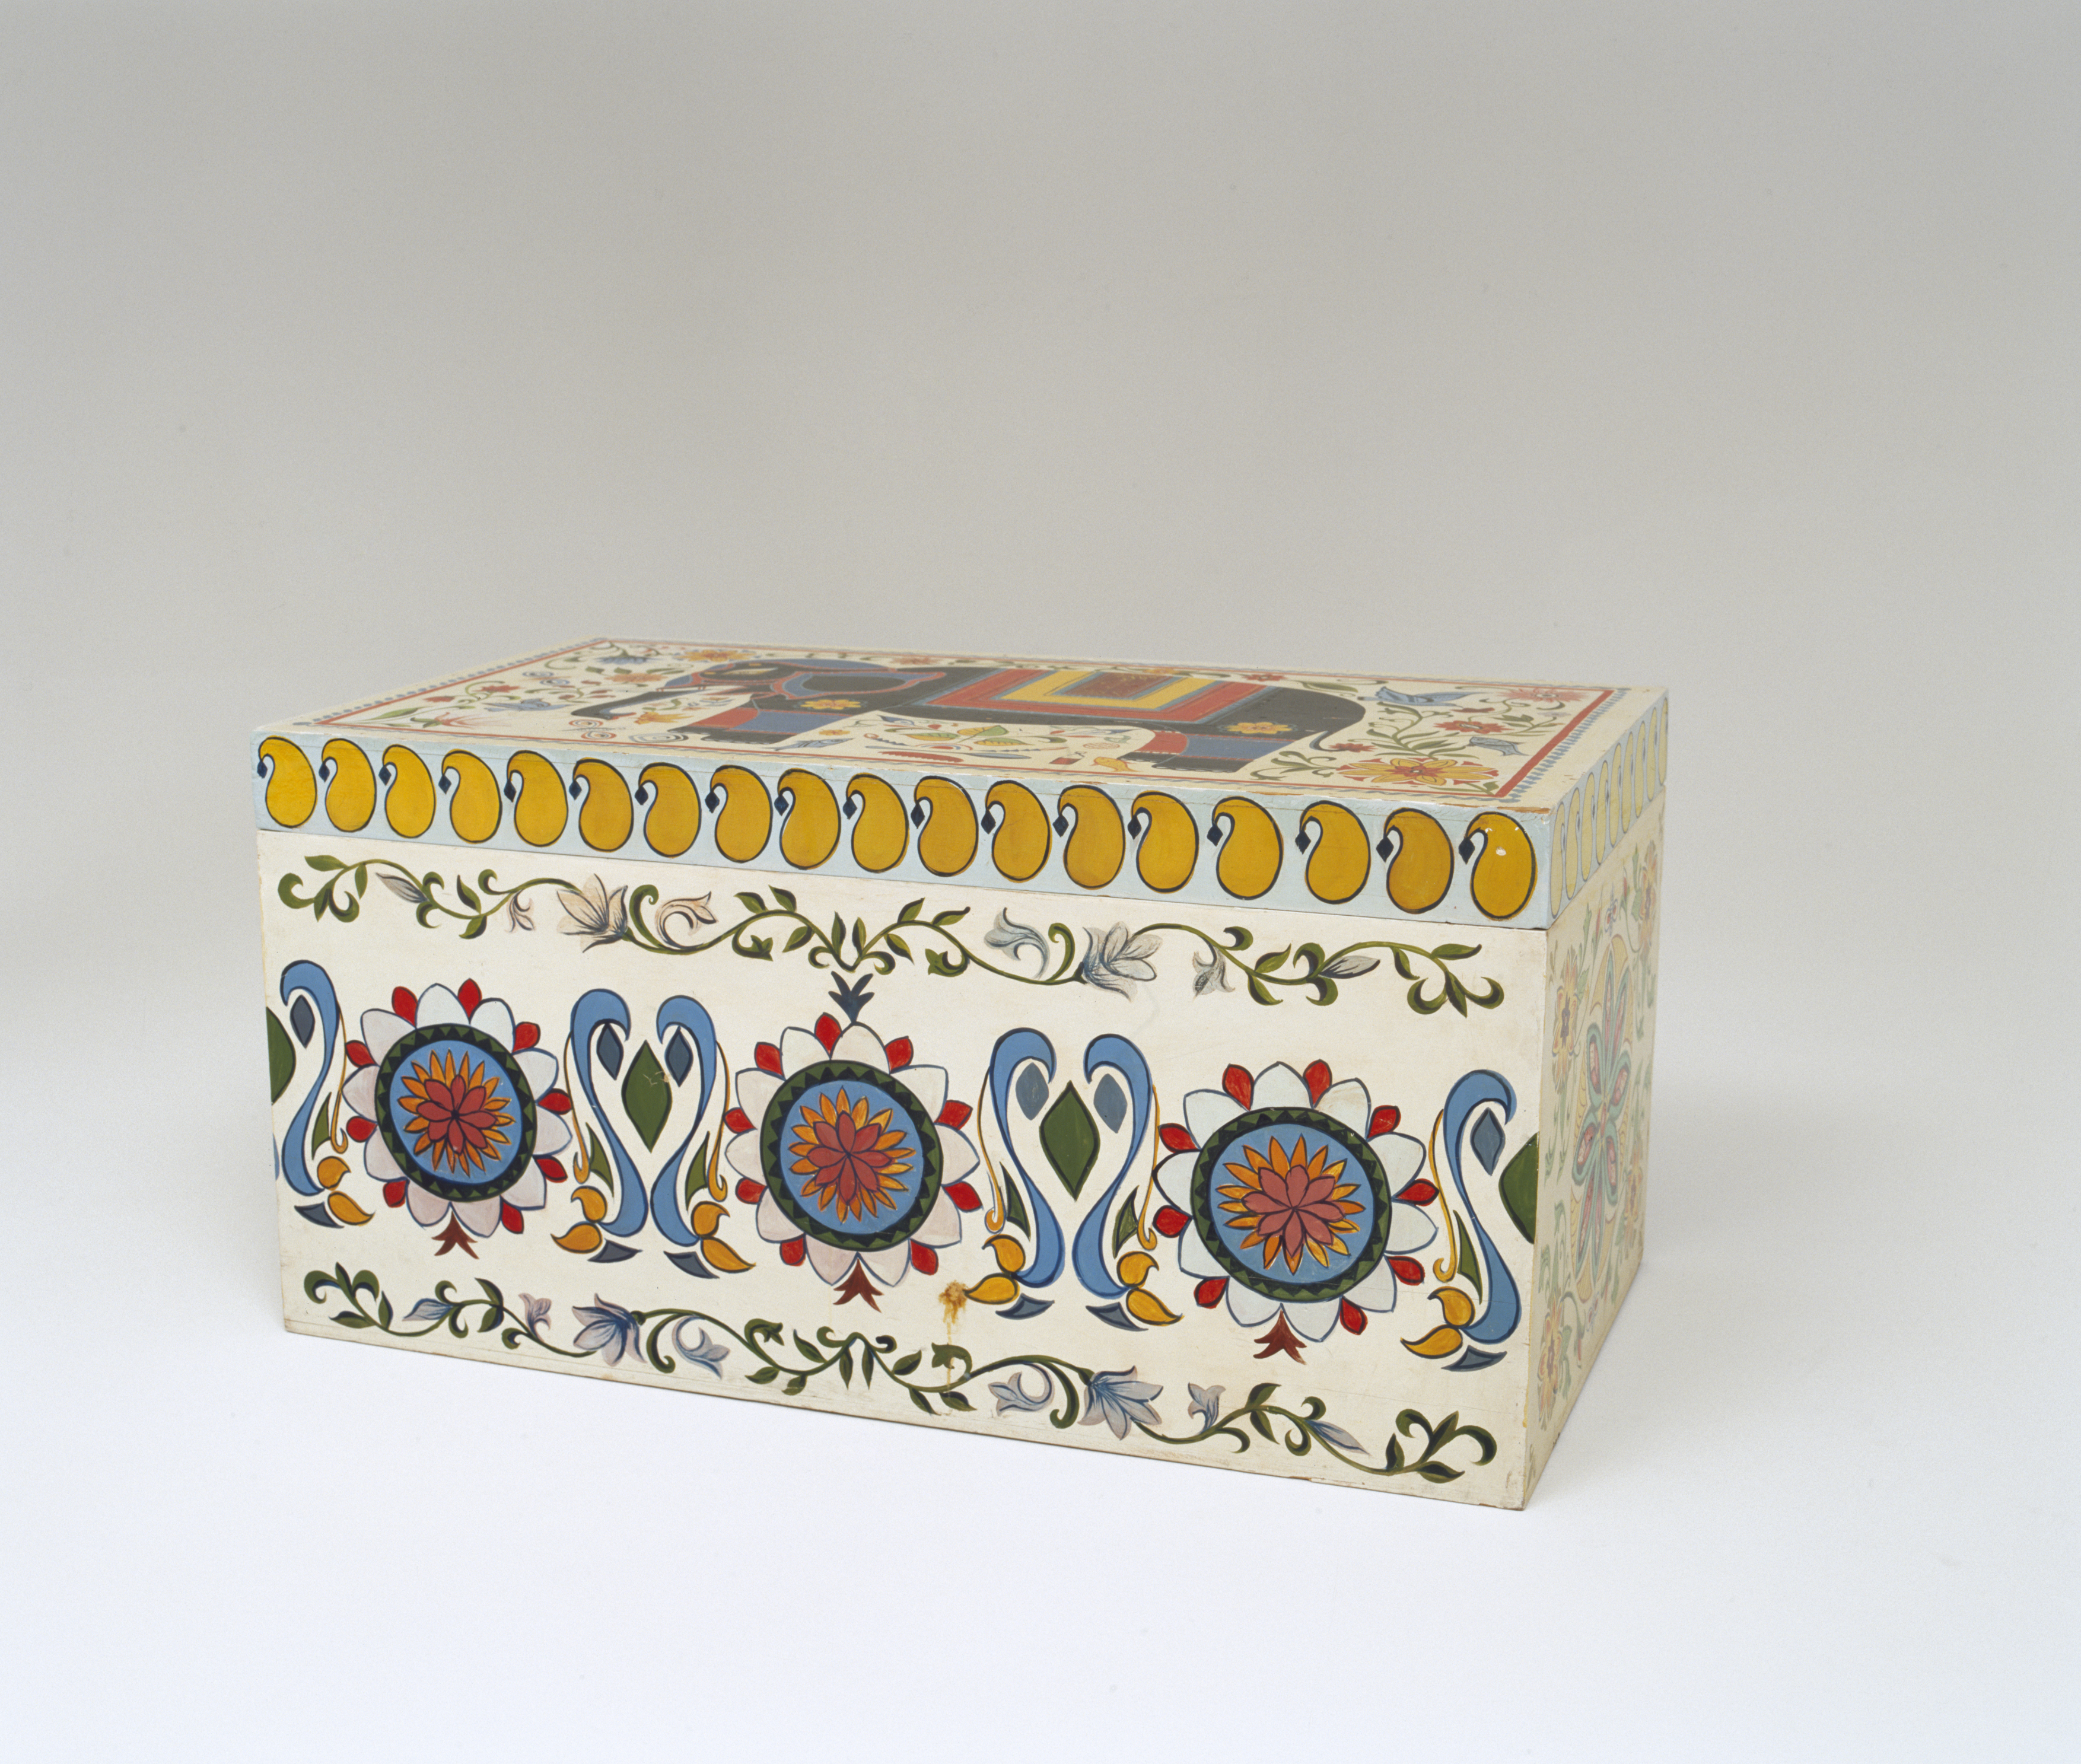 Wooden linen chest hand-painted to match the nakshi kantha. It is decorated on the top and all four sides. On the top is a black elephant with yellow red and blue trappings surrounded by flowers, leaves, fish and some articles of everyday usage. The border is a red line with a blue 'ribbon' pattern outside it. Each end of the box is decorated with a stylised lotus flower in the centre surrounded by more flowers, leaves and insects. On the front of the box is a whole row of stylised lotus flowers surrounded by swirling fronds of vegetation. There is a row of yellow boteh (in Bangladesh, kalka) around the top.